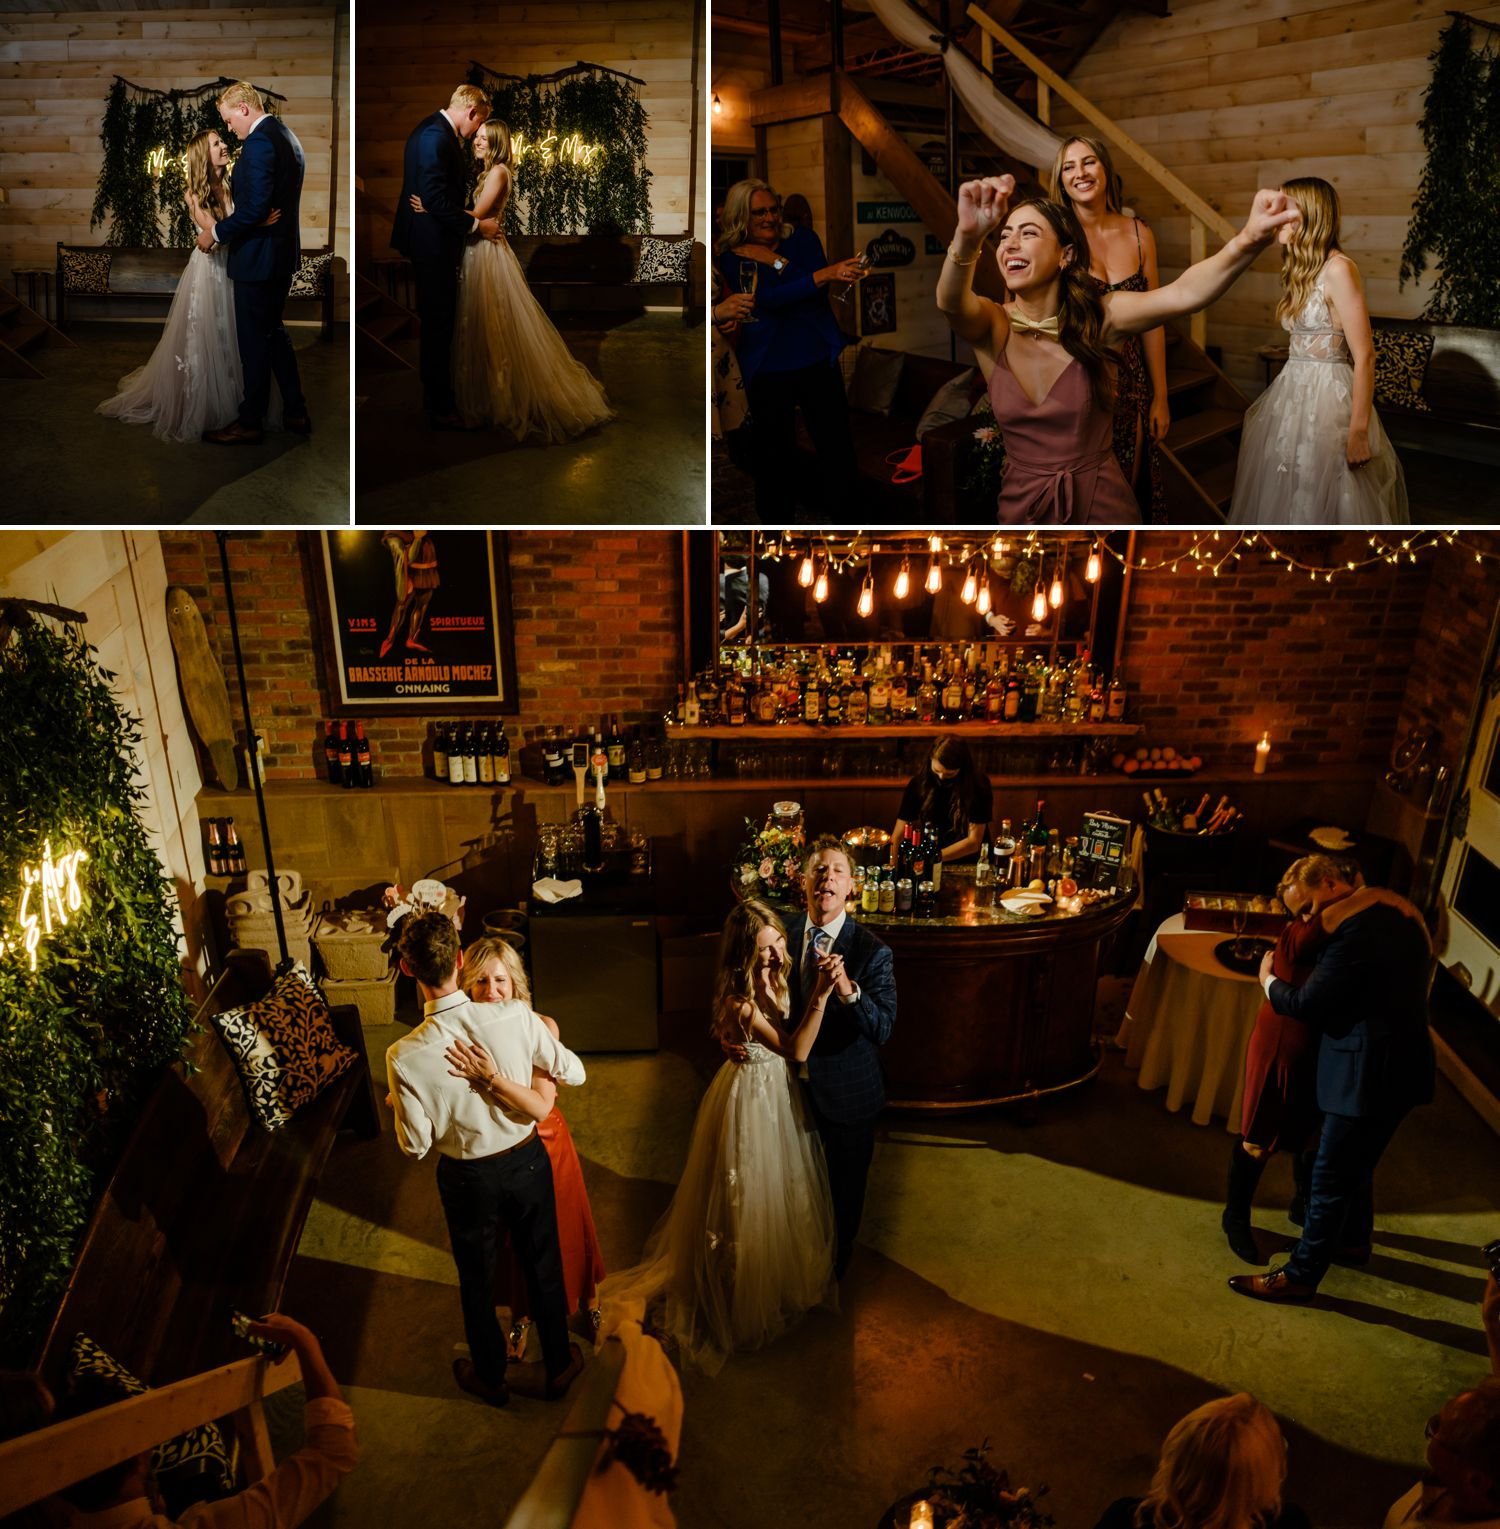 candid dance floor moments during an intimate cottage wedding reception in calabogie ontario